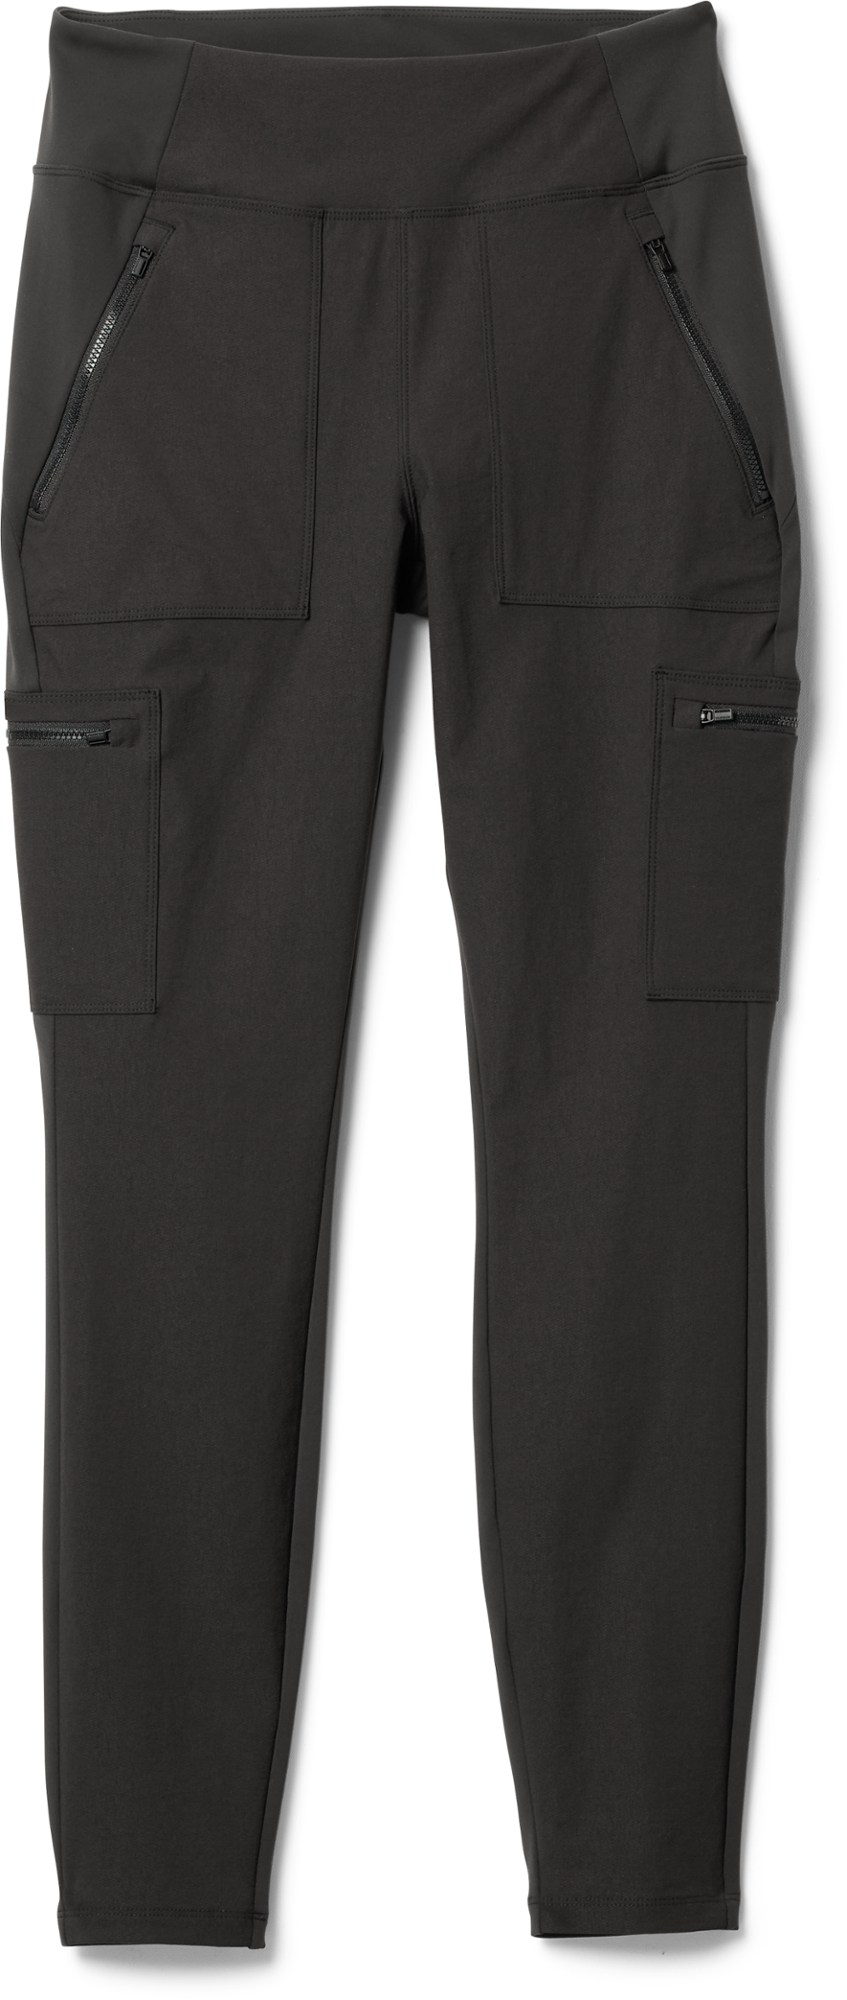 The Best Travel Pants: Athleta Headlands Hybrid Tight Review